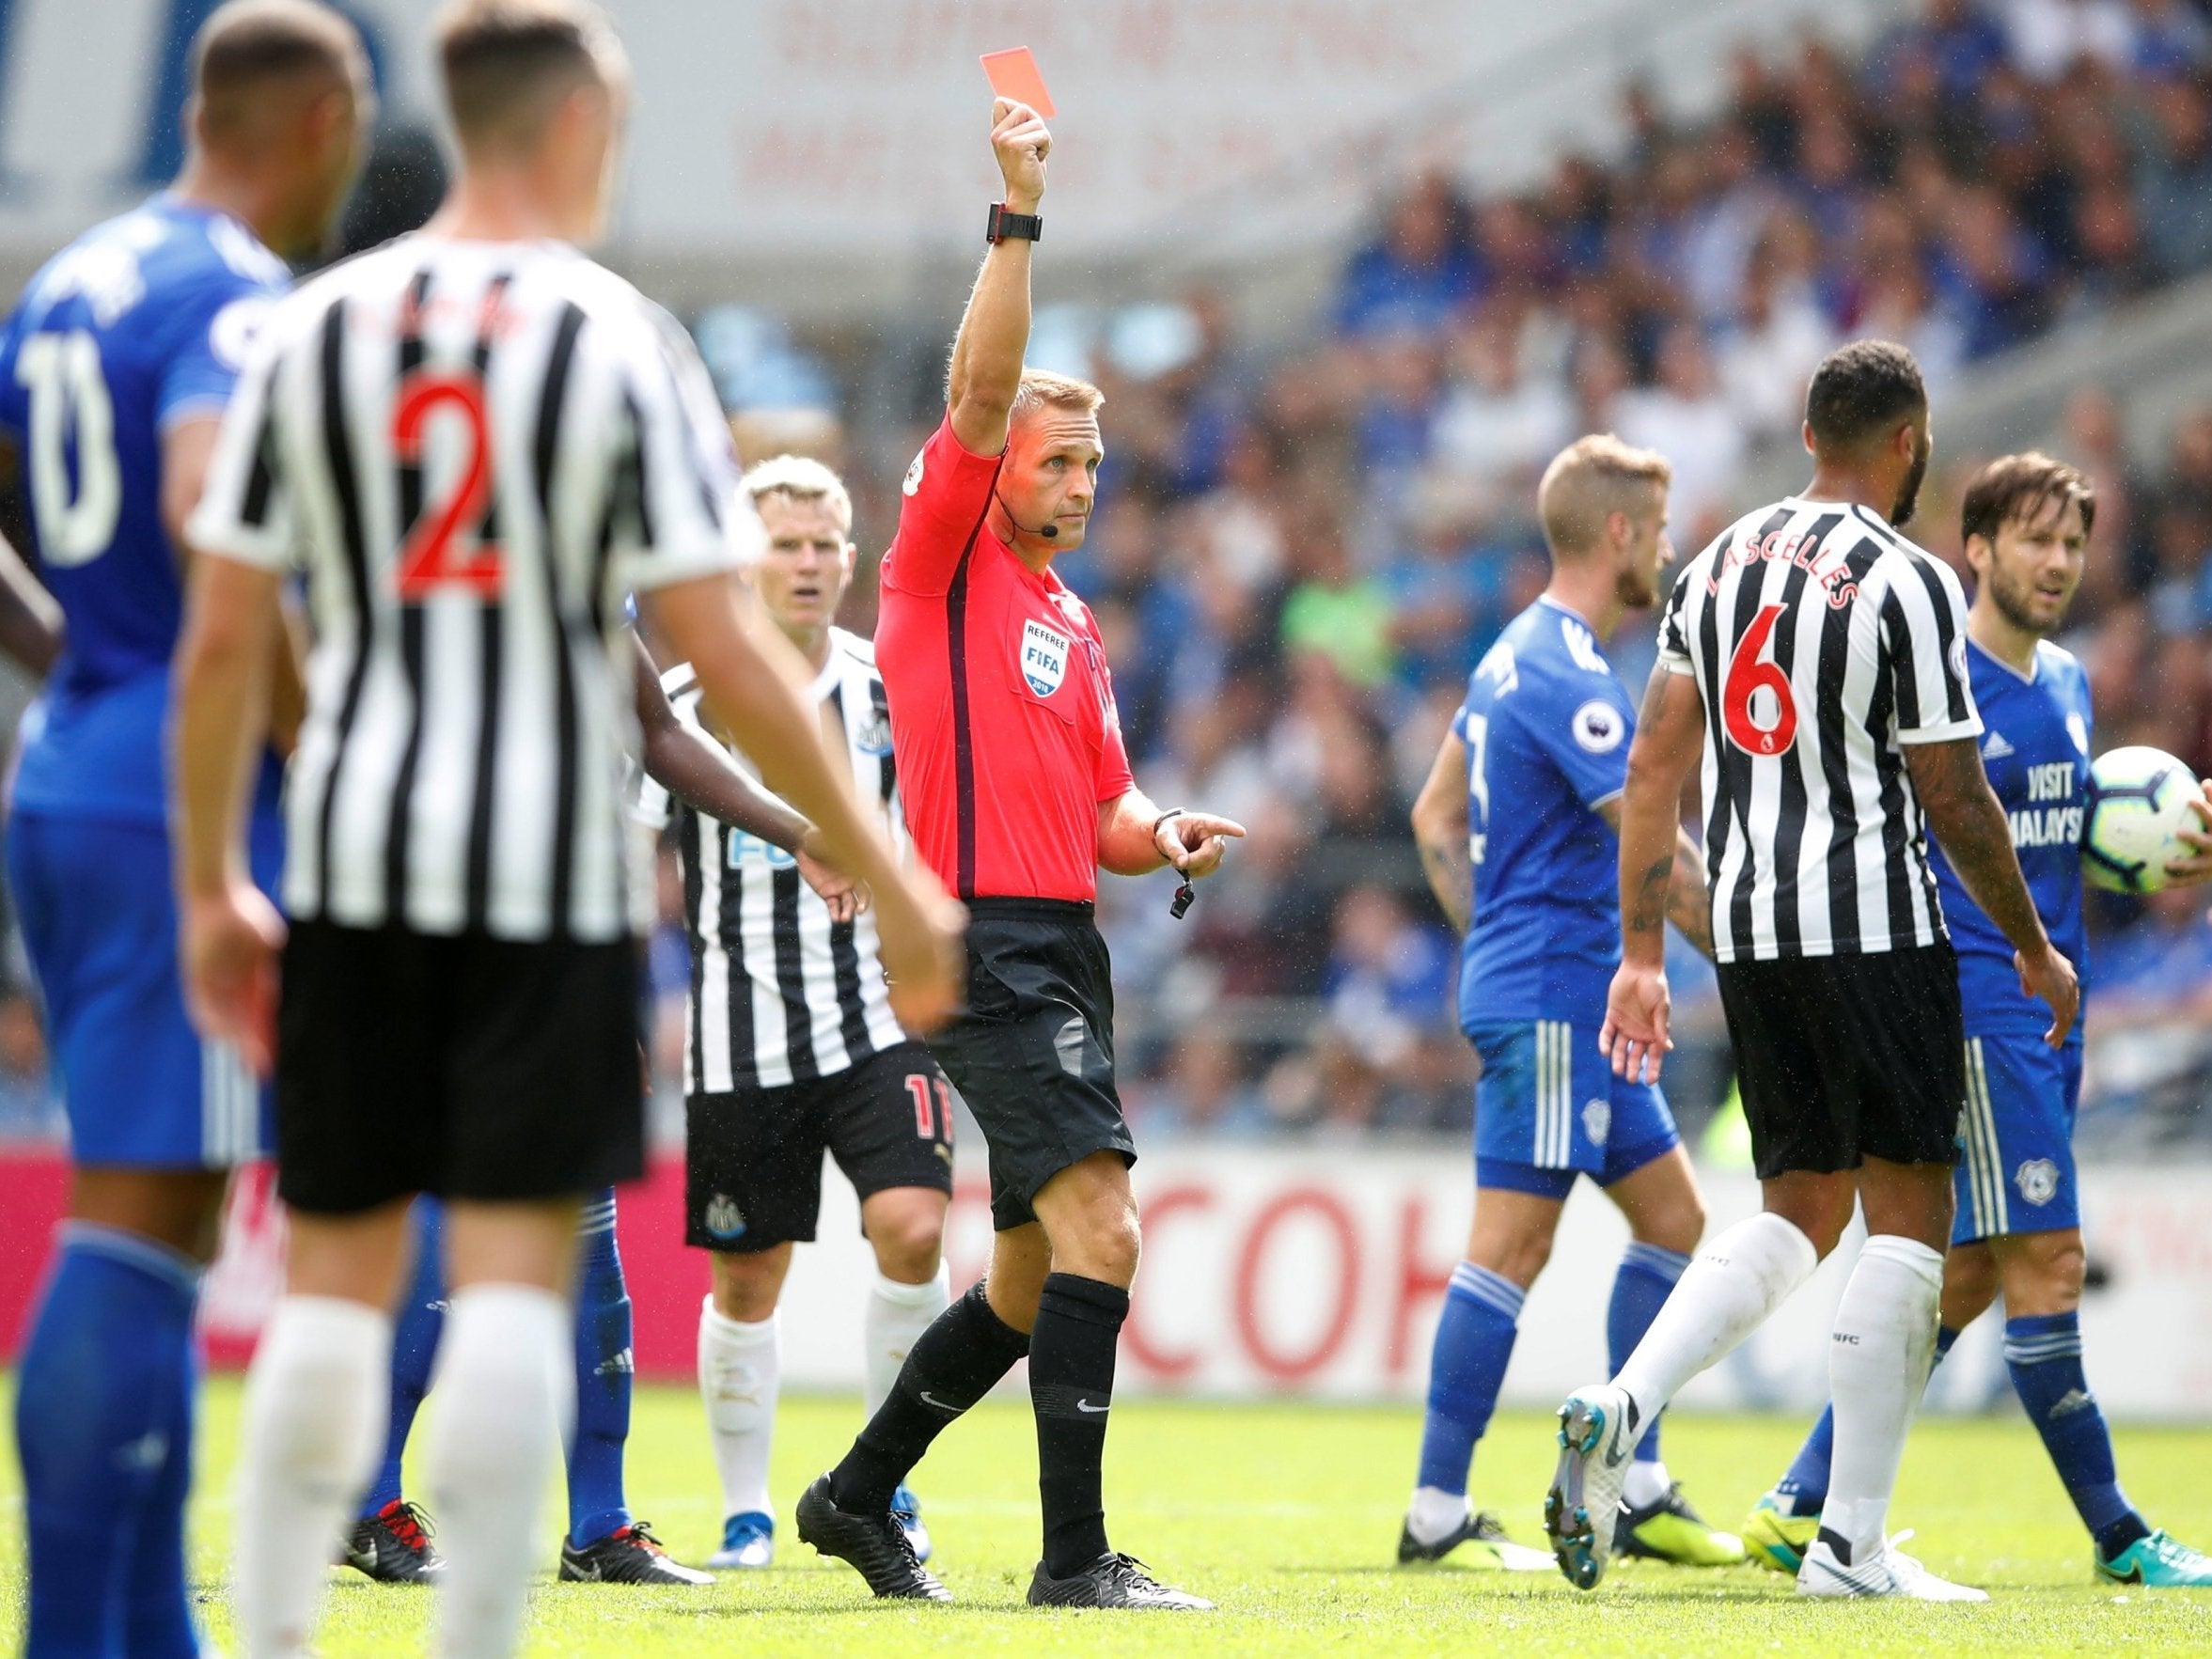 Cardiff vs Newcastle LIVE: Isaac Hayden is sent-off for tackle on Josh Murphy as Kenedy misses last-minute penalty